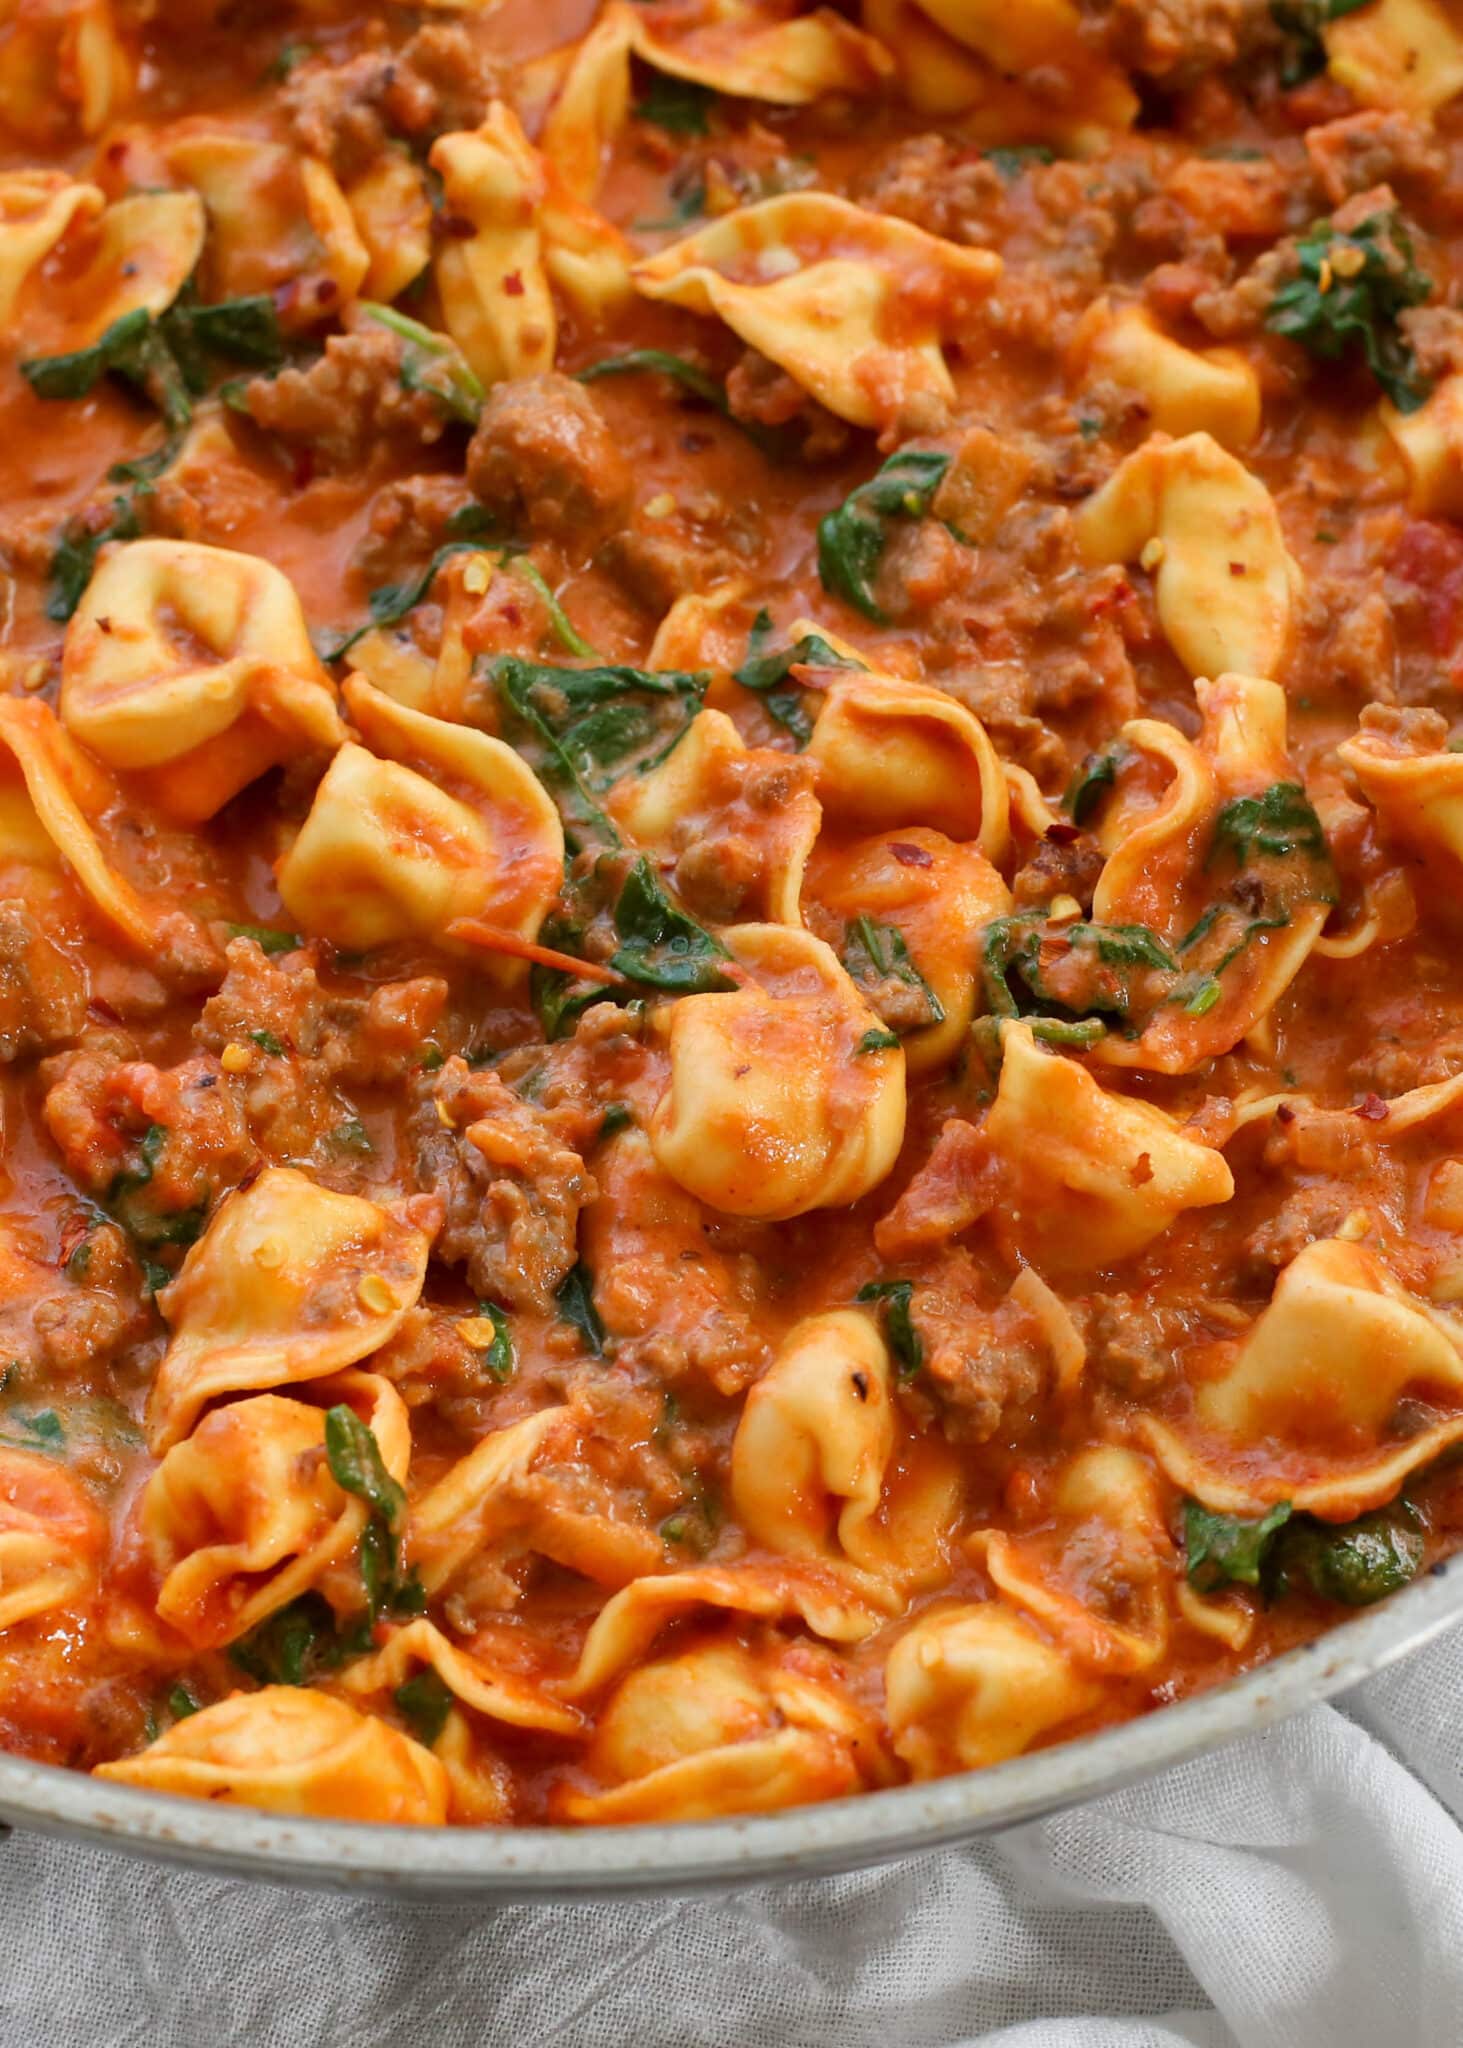 Sausage, Tortellini, and Spinach in a Creamy Tomato Sauce - Barefeet i